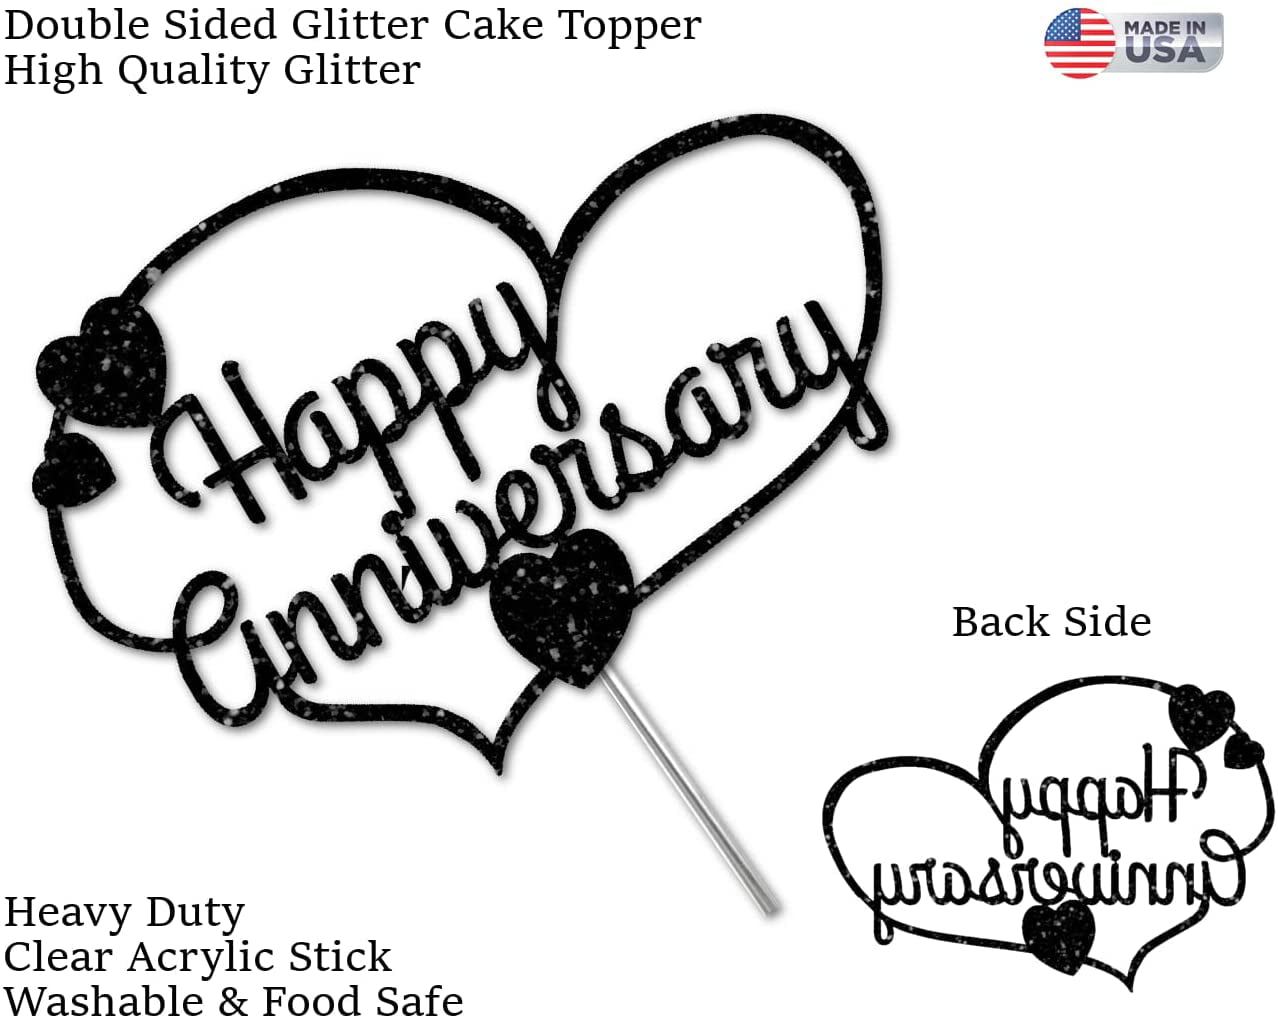  Happy Anniversary Cake Topper - Wedding Anniversary Company  Anniversary Party Decoration Supplies, Black Glitter : Grocery & Gourmet  Food